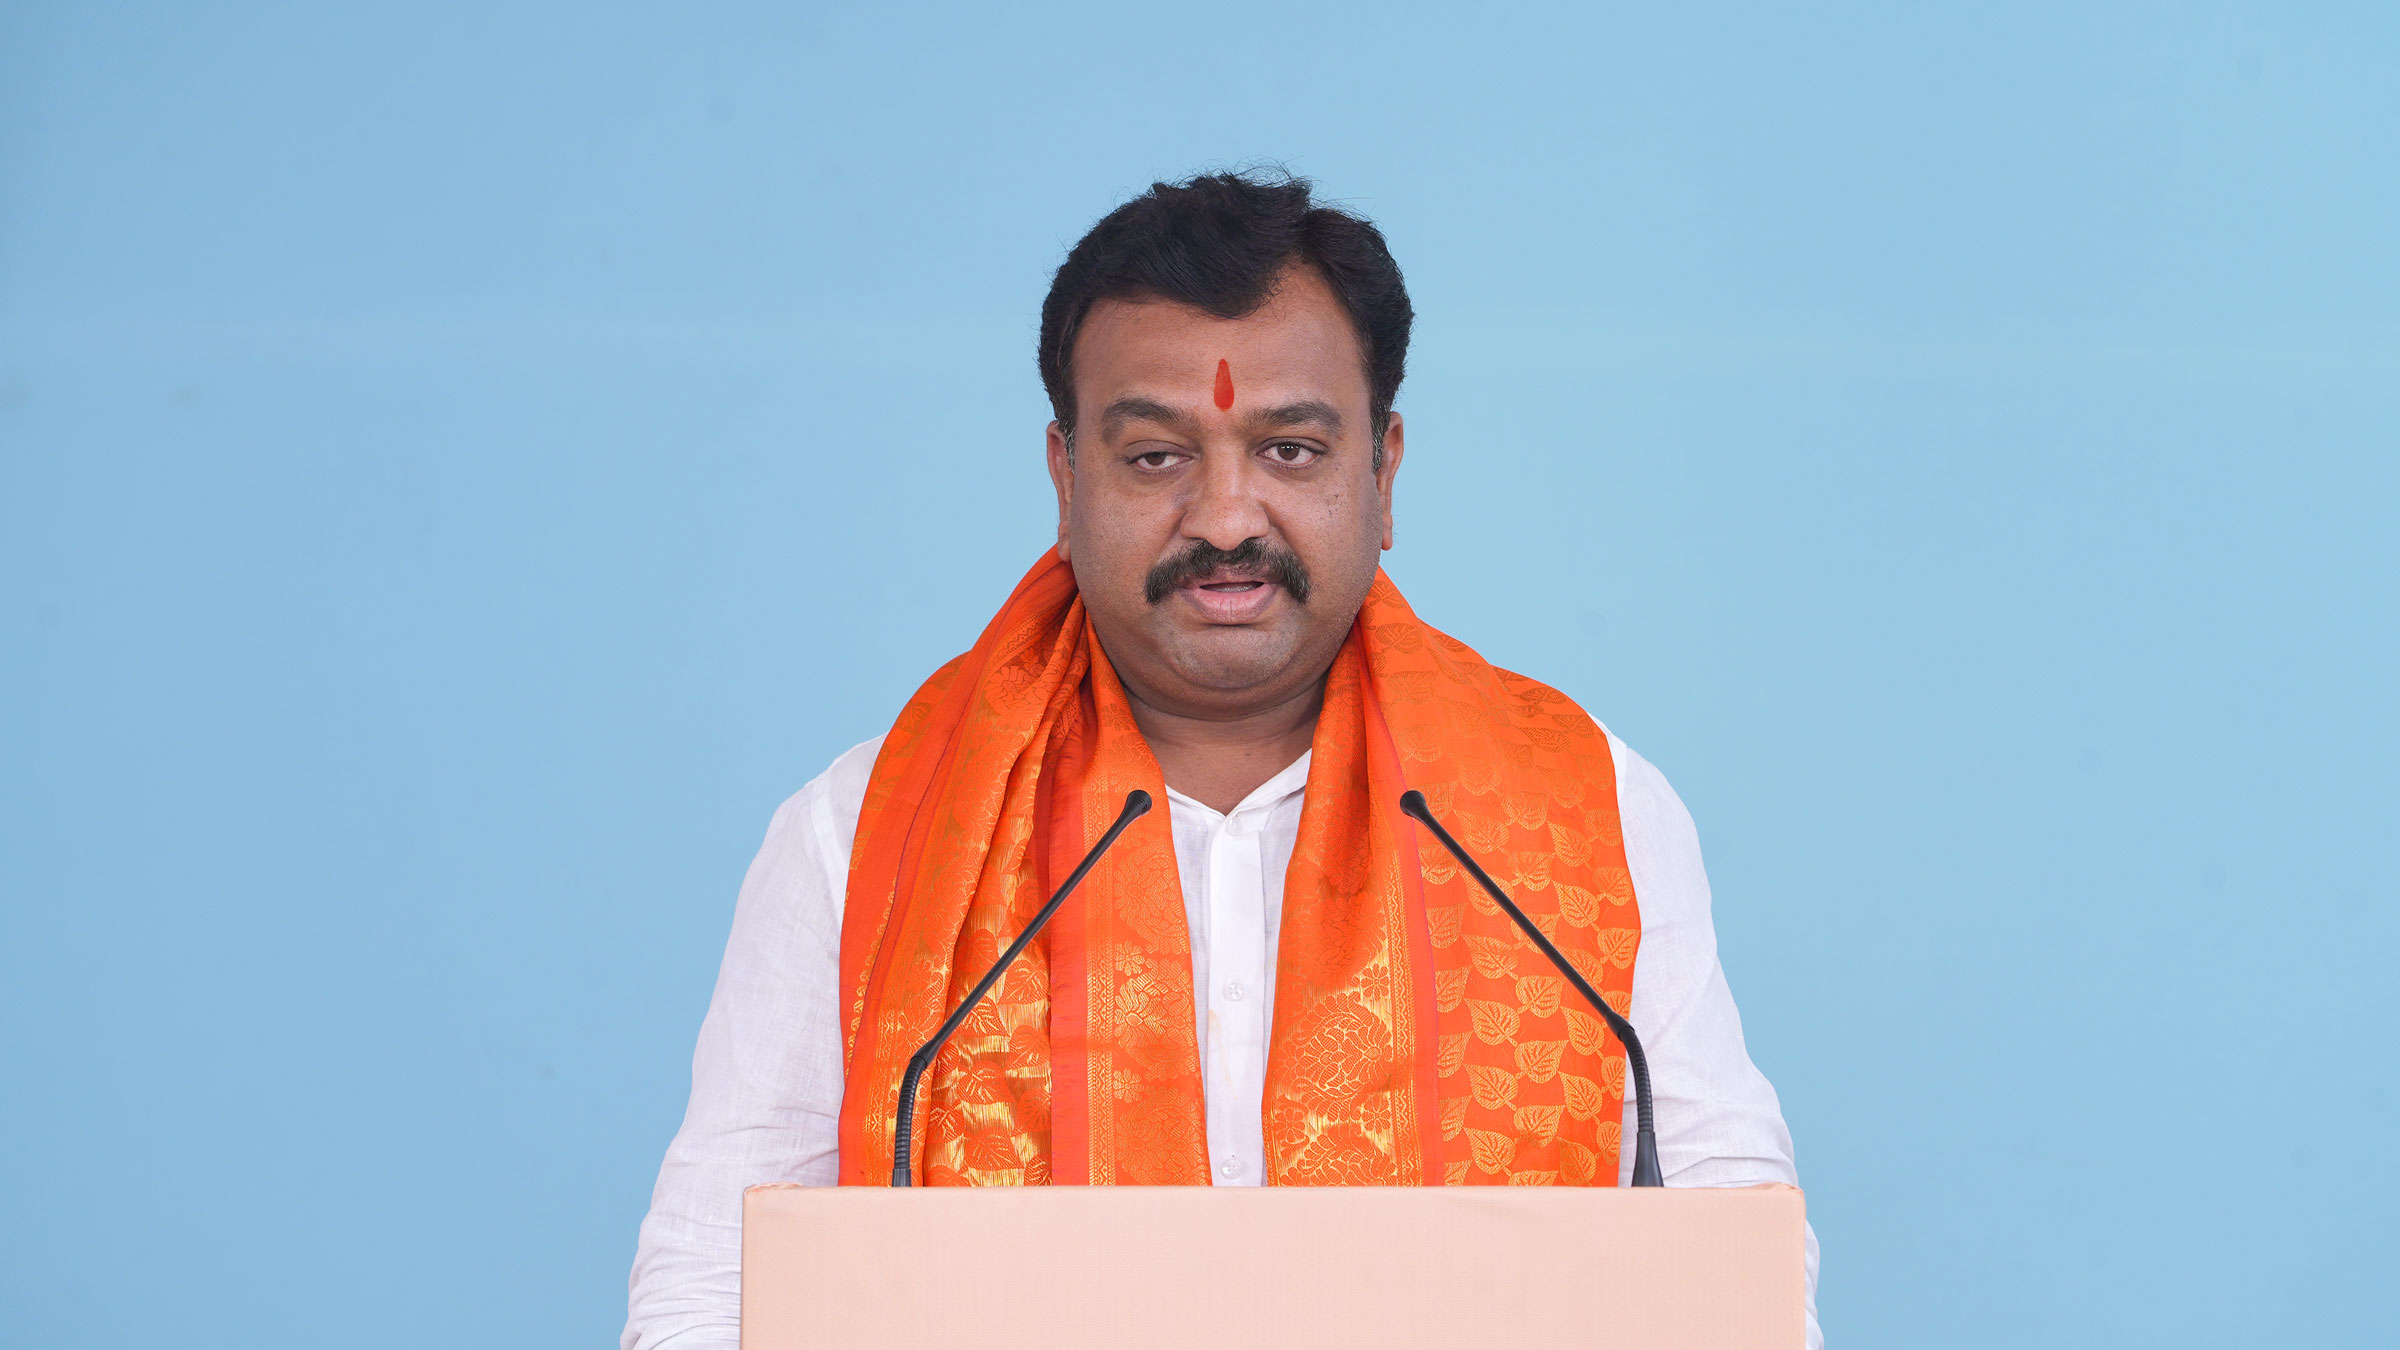 While expressing his views on the Nation and Dharma, Mr Prasad Pandit (President, Prajnapuri Jnanpeetha, Akkalkot, Maharashtra) said - As a takeaway from the ‘Vaishvik Hindu Rashtra Mahotsav’, let us not restrict ourselves to related activities, but learn about sadhana as well.